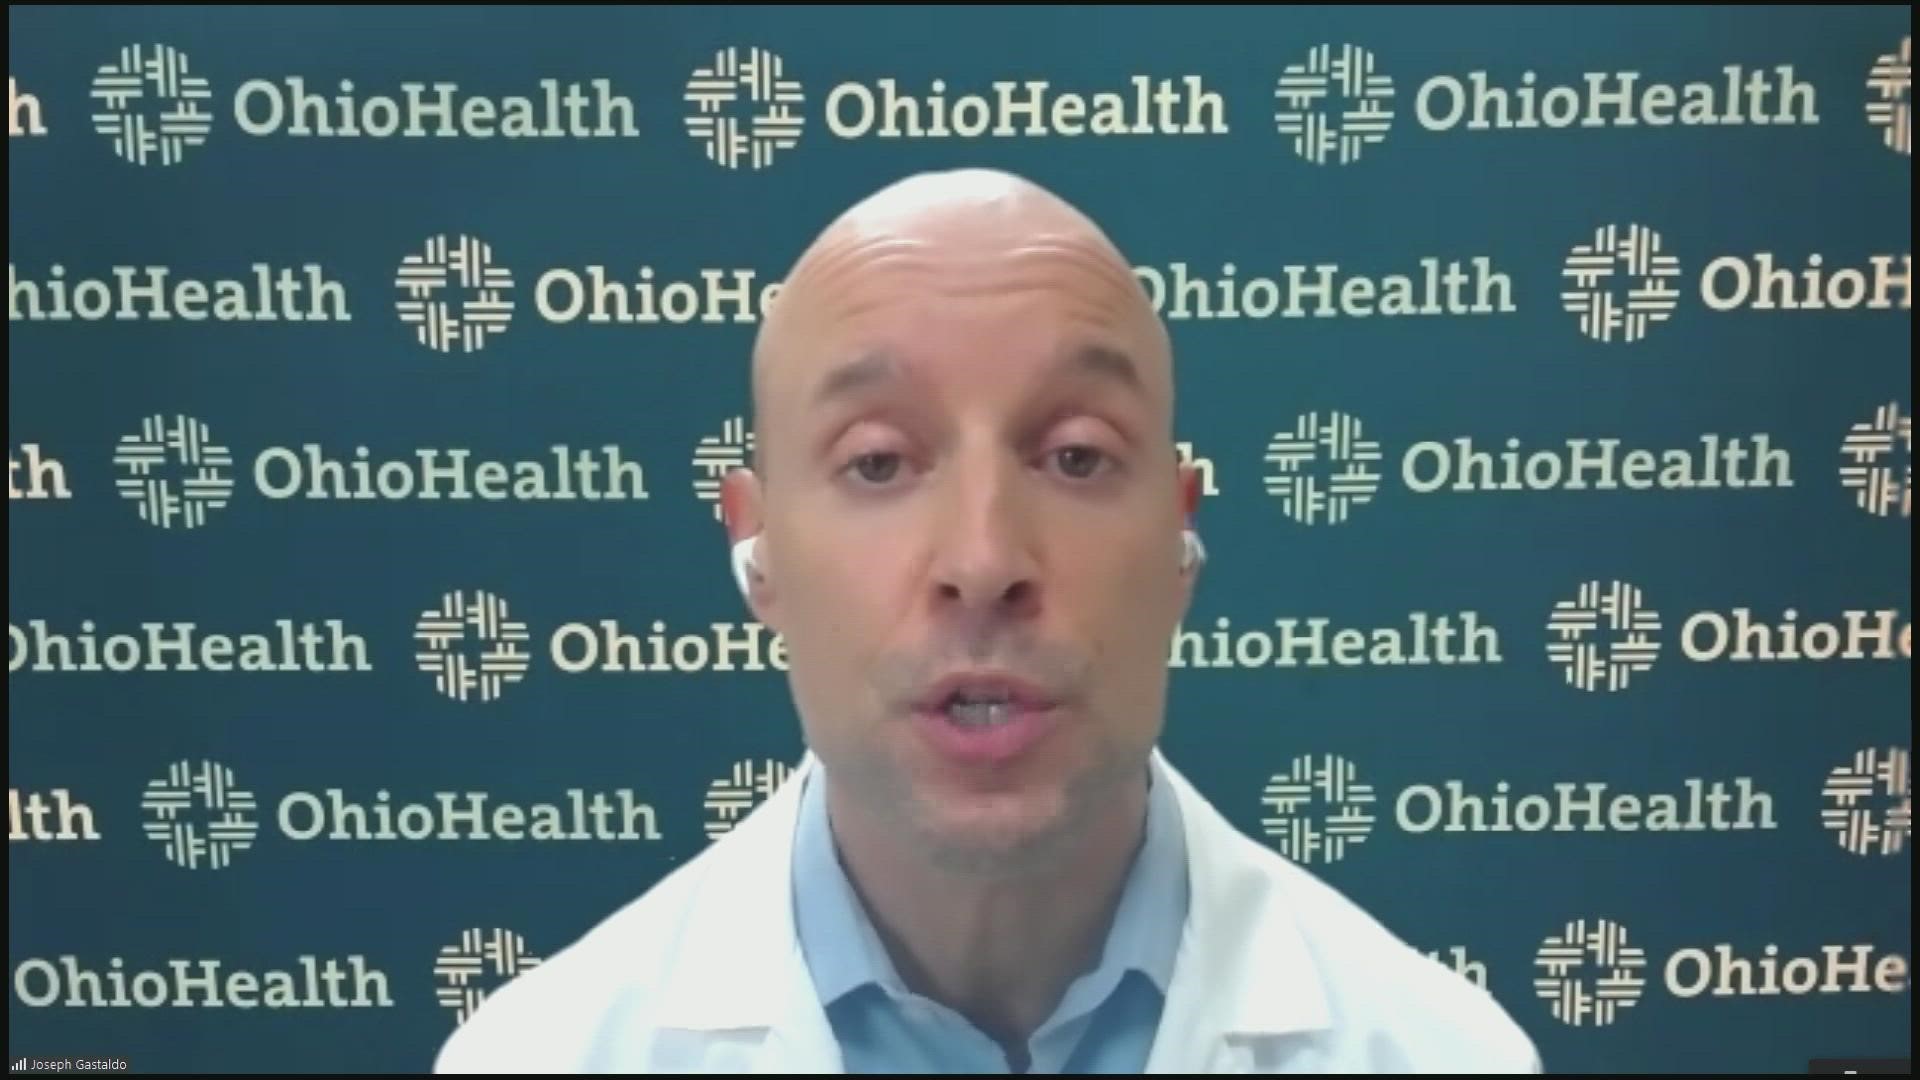 The Ohio Department of Health reported nearly 30,000 cases on Thursday.